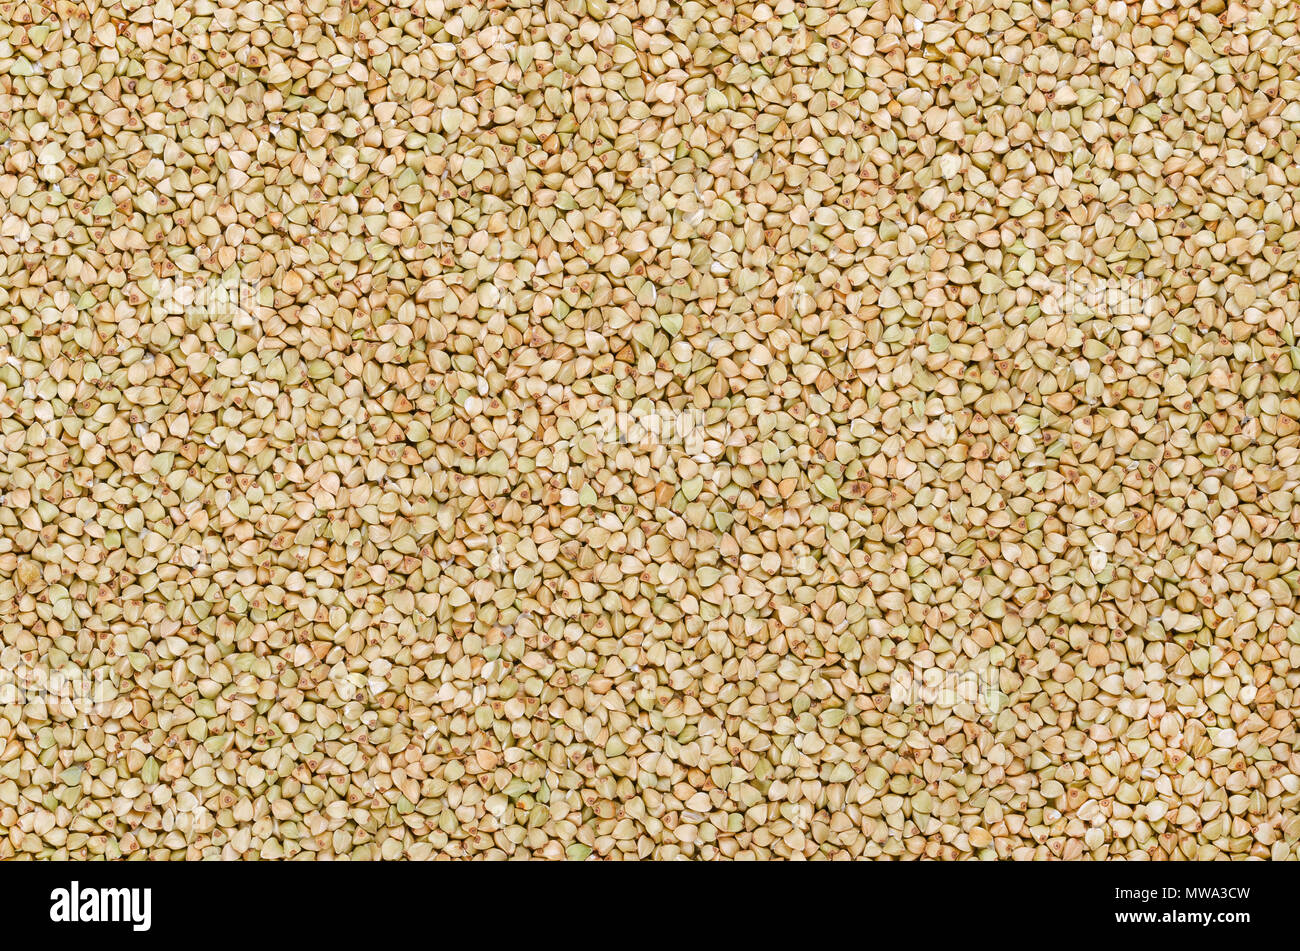 Hulled common buckwheat grains, surface and background. Gluten free pseudocereal. Fagopyrum esculentum, also known as Japanese or silverhull buckwheat Stock Photo